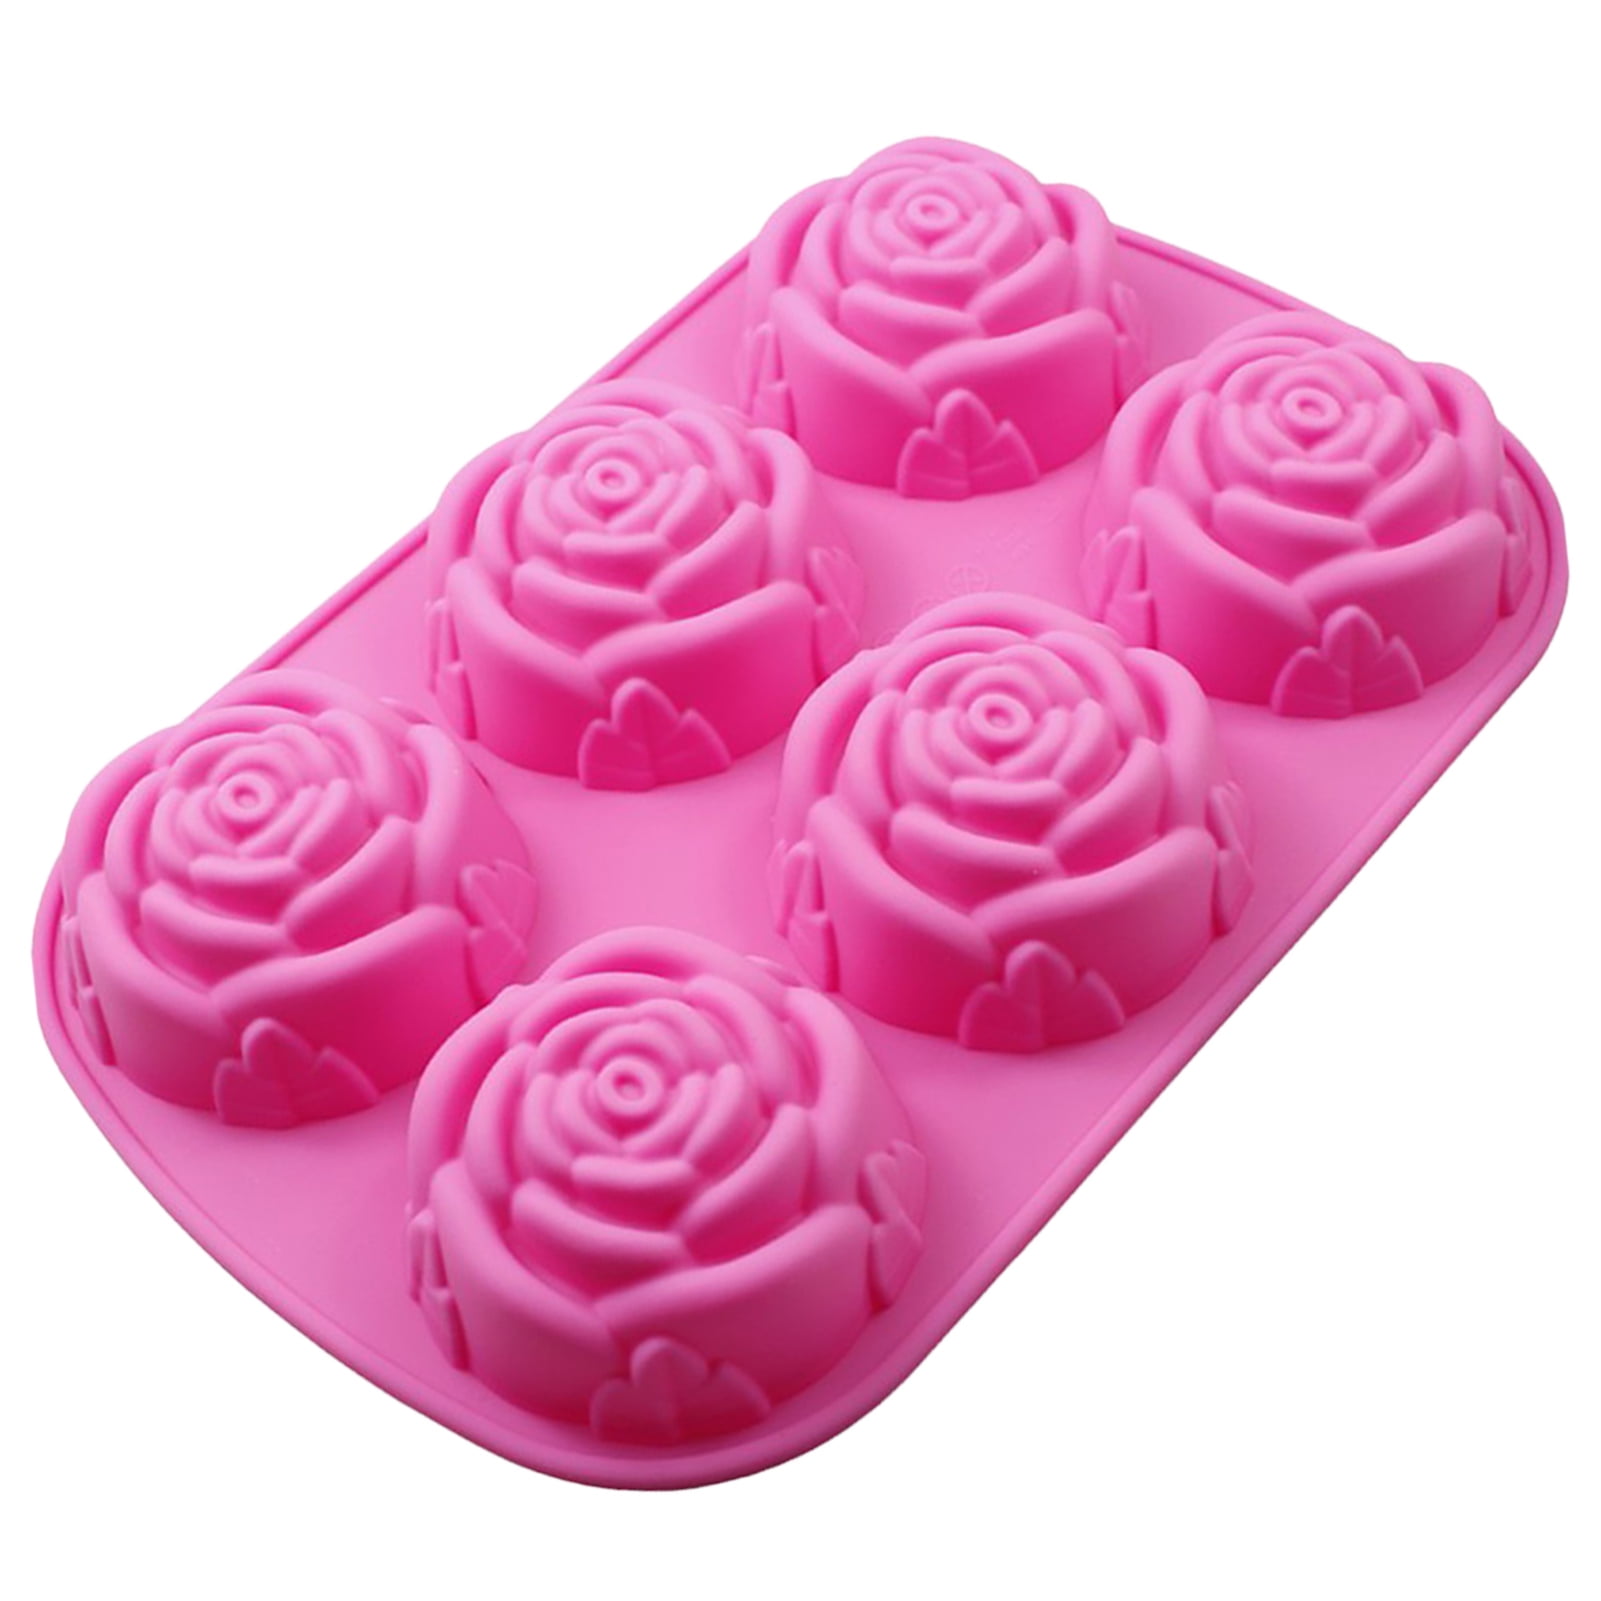  BESTOYARD 2pcs Love Rose Mold Baking Mold Cake Molds Silicone  Valentine Tray Candy Molds Silicone Shapes Silcone Molds Rose Fondant Molds  Love Heart Silica Gel Baking Supplies Mousse : Home 